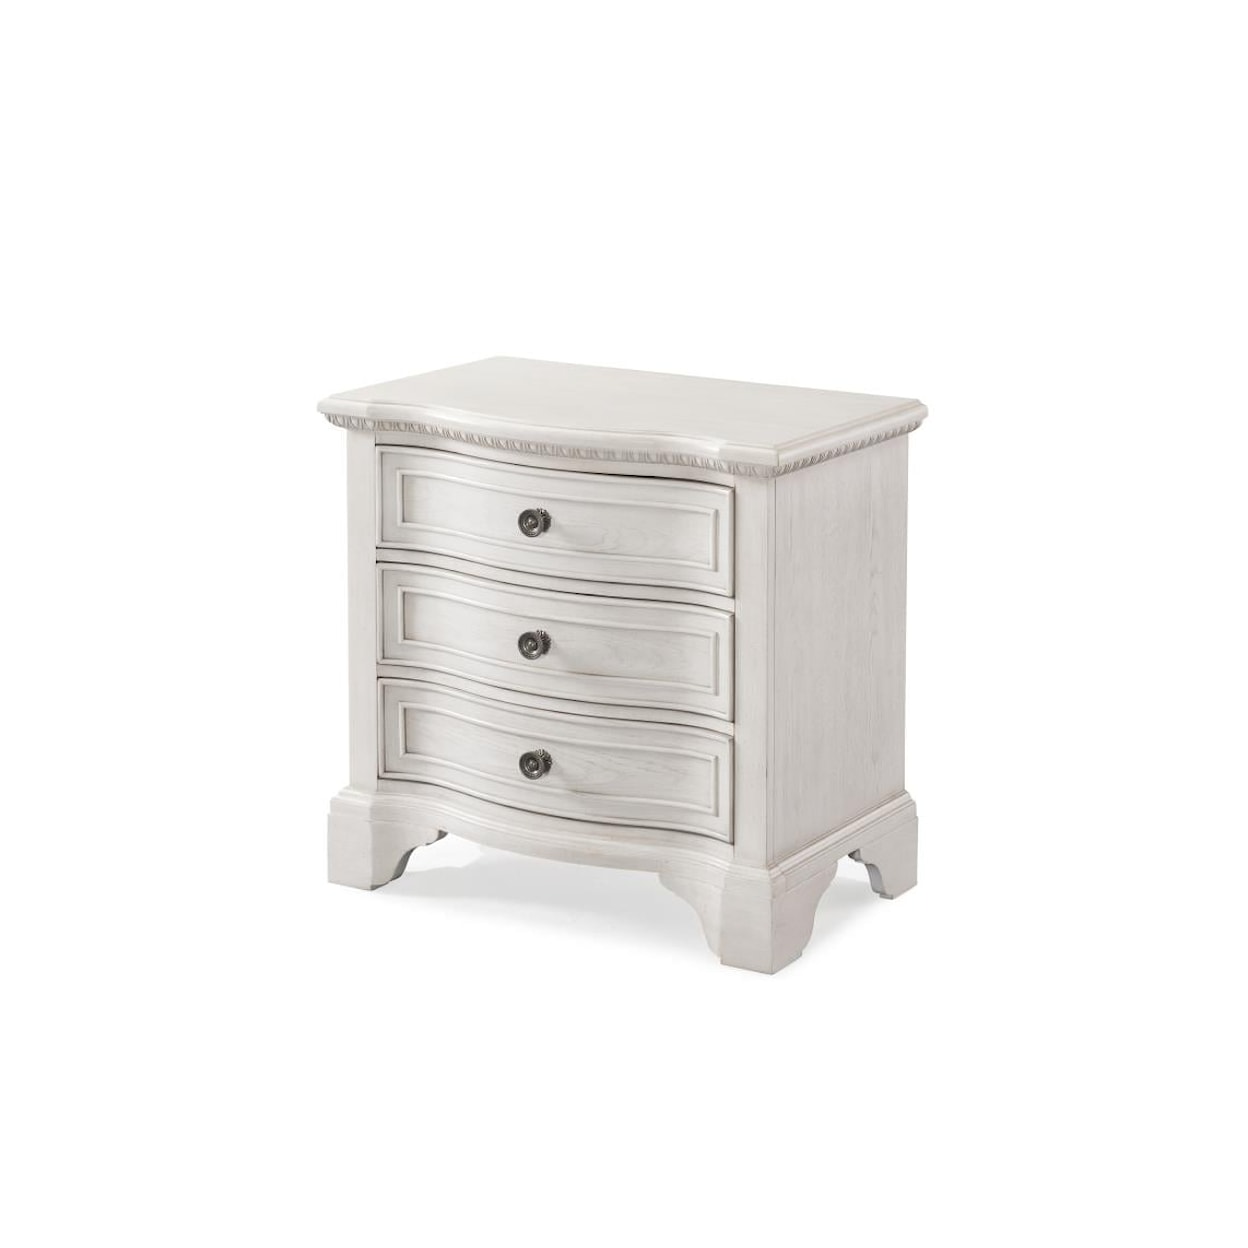 Trisha Yearwood Home Collection by Legacy Classic Jasper County Nightstand